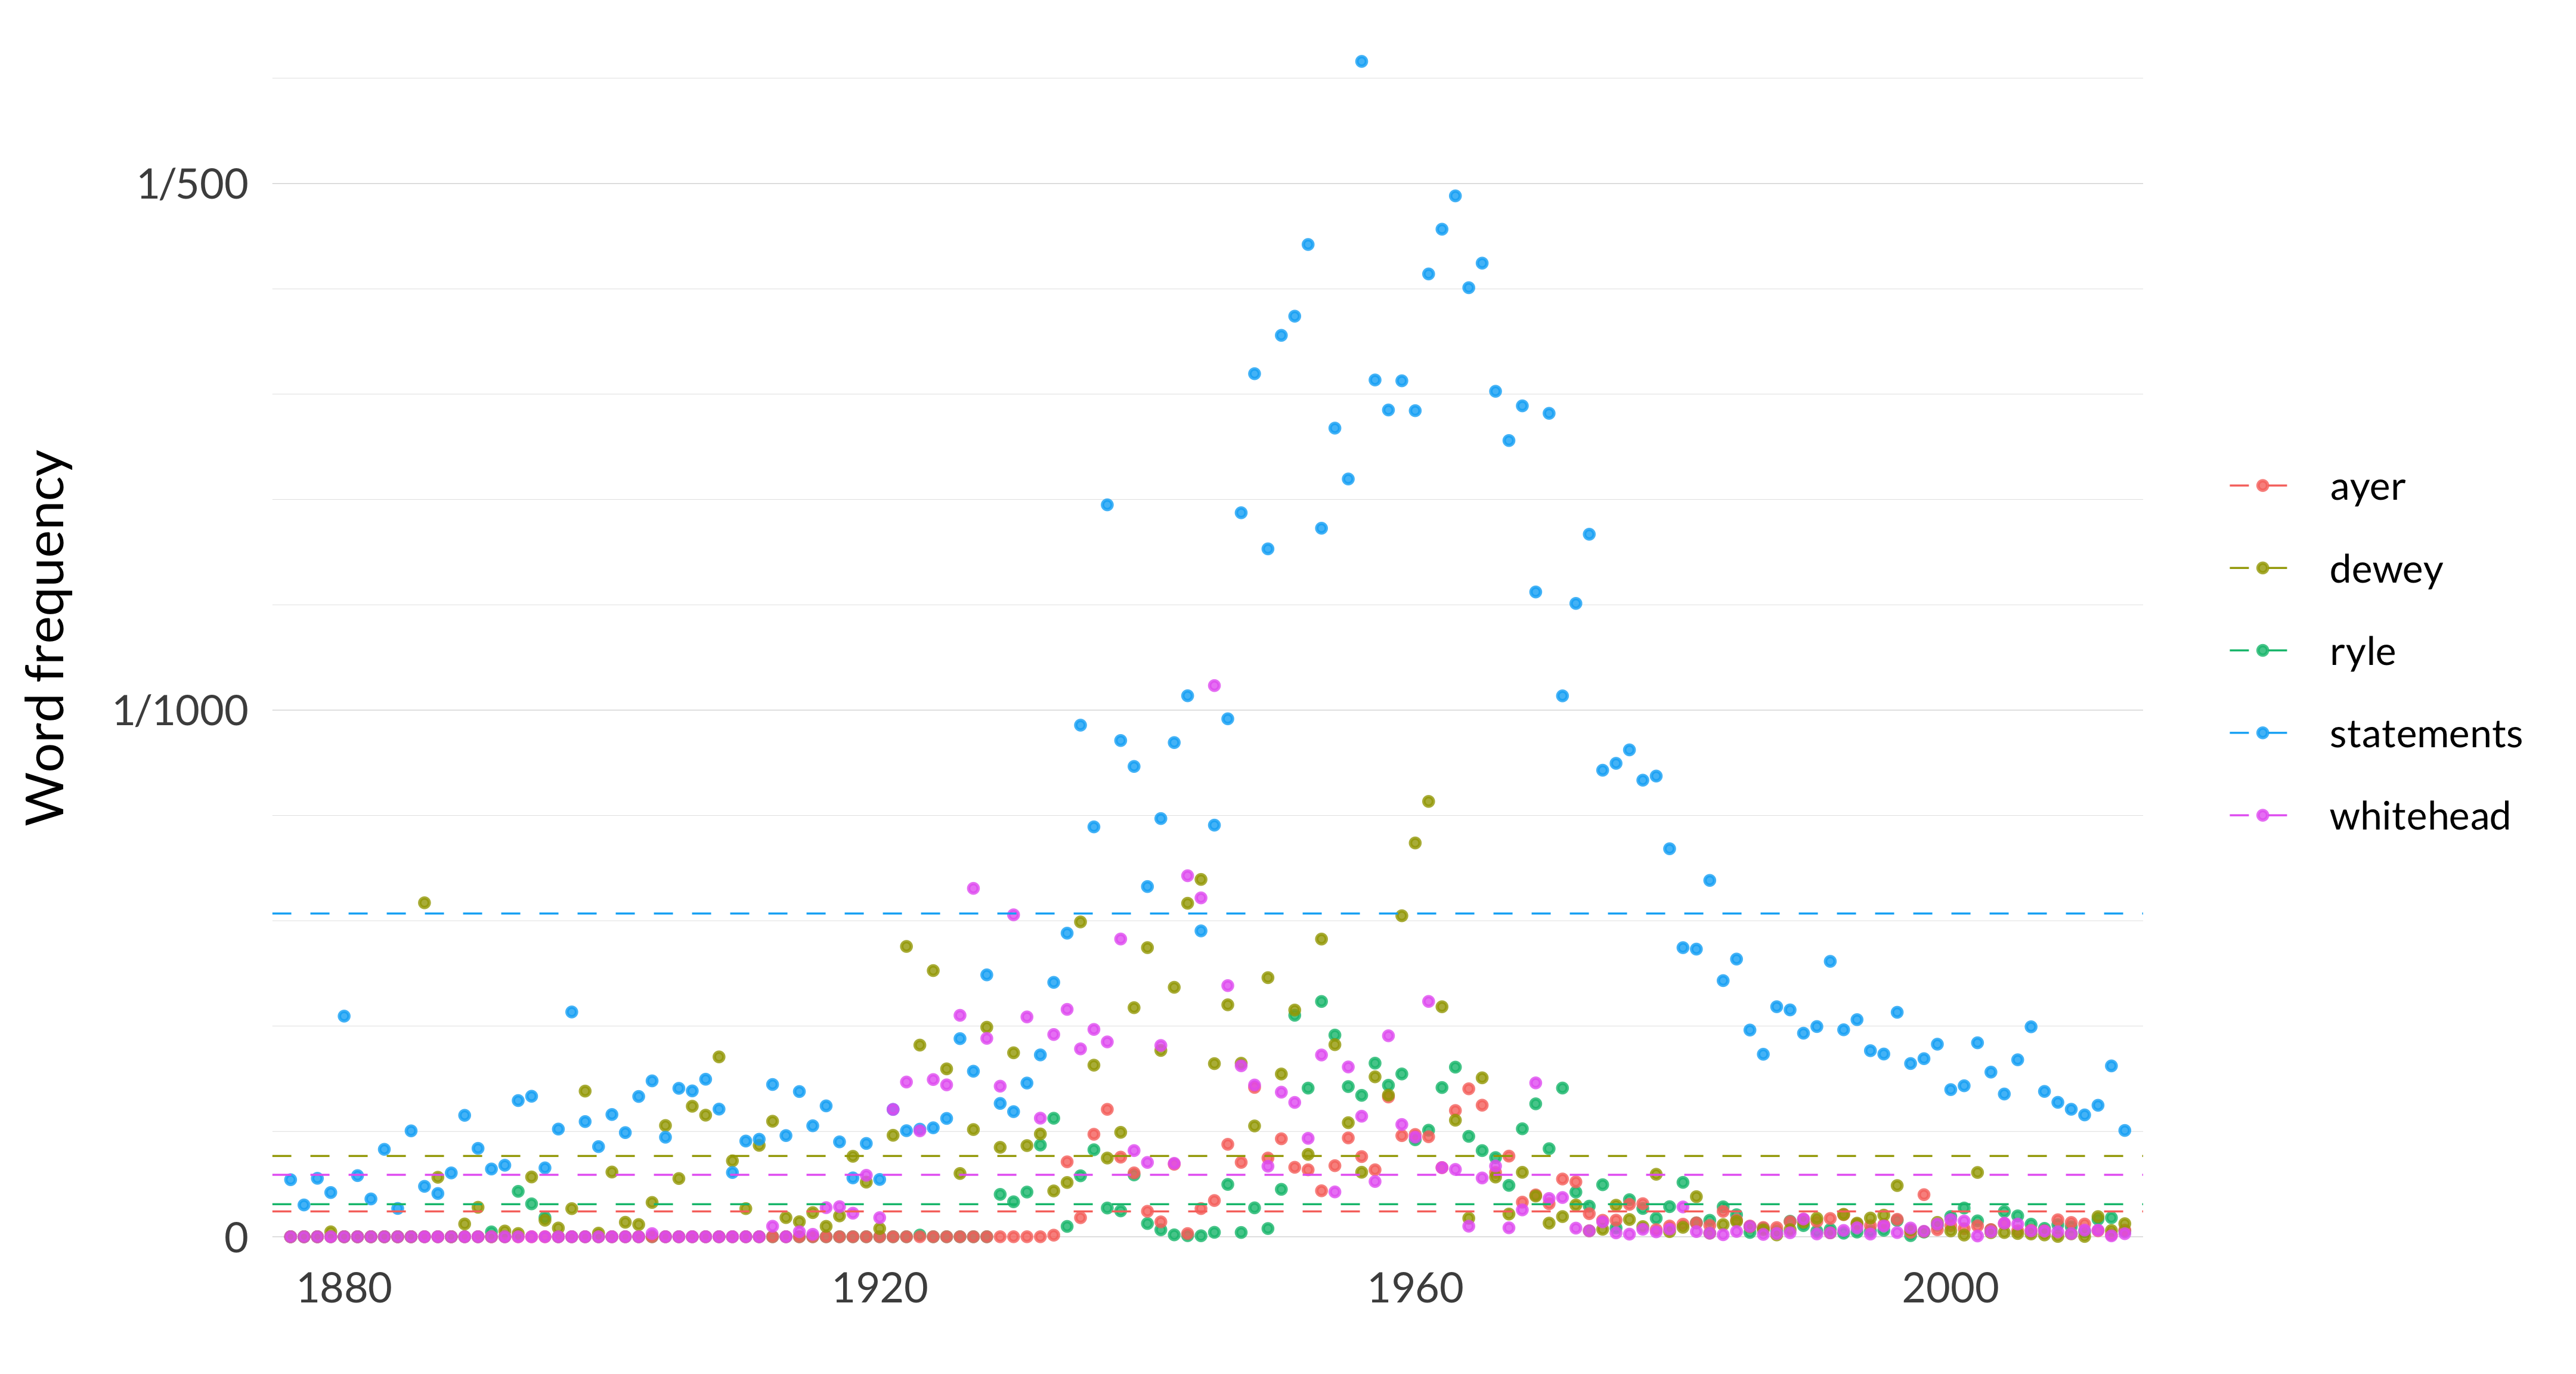 A scatterplot showing the frequency of the words ryle, ayer, dewey, statements, whitehead. The word ryle appears, on average across the years, 62 times per million words, and in the median year, it appears 15 times per million words. Its most frequent occurrence is in 1953 when it appears 447 times per million words, and its least frequent occurrence is in 1876 when it appears 0 times per million words. The word ayer appears, on average across the years, 48 times per million words, and in the median year, it appears 14 times per million words. Its most frequent occurrence is in 1948 when it appears 284 times per million words, and its least frequent occurrence is in 1876 when it appears 0 times per million words. The word dewey appears, on average across the years, 153 times per million words, and in the median year, it appears 58 times per million words. Its most frequent occurrence is in 1961 when it appears 827 times per million words, and its least frequent occurrence is in 1876 when it appears 0 times per million words. The word statements appears, on average across the years, 614 times per million words, and in the median year, it appears 350 times per million words. Its most frequent occurrence is in 1956 when it appears 2232 times per million words, and its least frequent occurrence is in 1884 when it appears 54 times per million words. The word whitehead appears, on average across the years, 118 times per million words, and in the median year, it appears 16 times per million words. Its most frequent occurrence is in 1945 when it appears 1047 times per million words, and its least frequent occurrence is in 1876 when it appears 0 times per million words. 